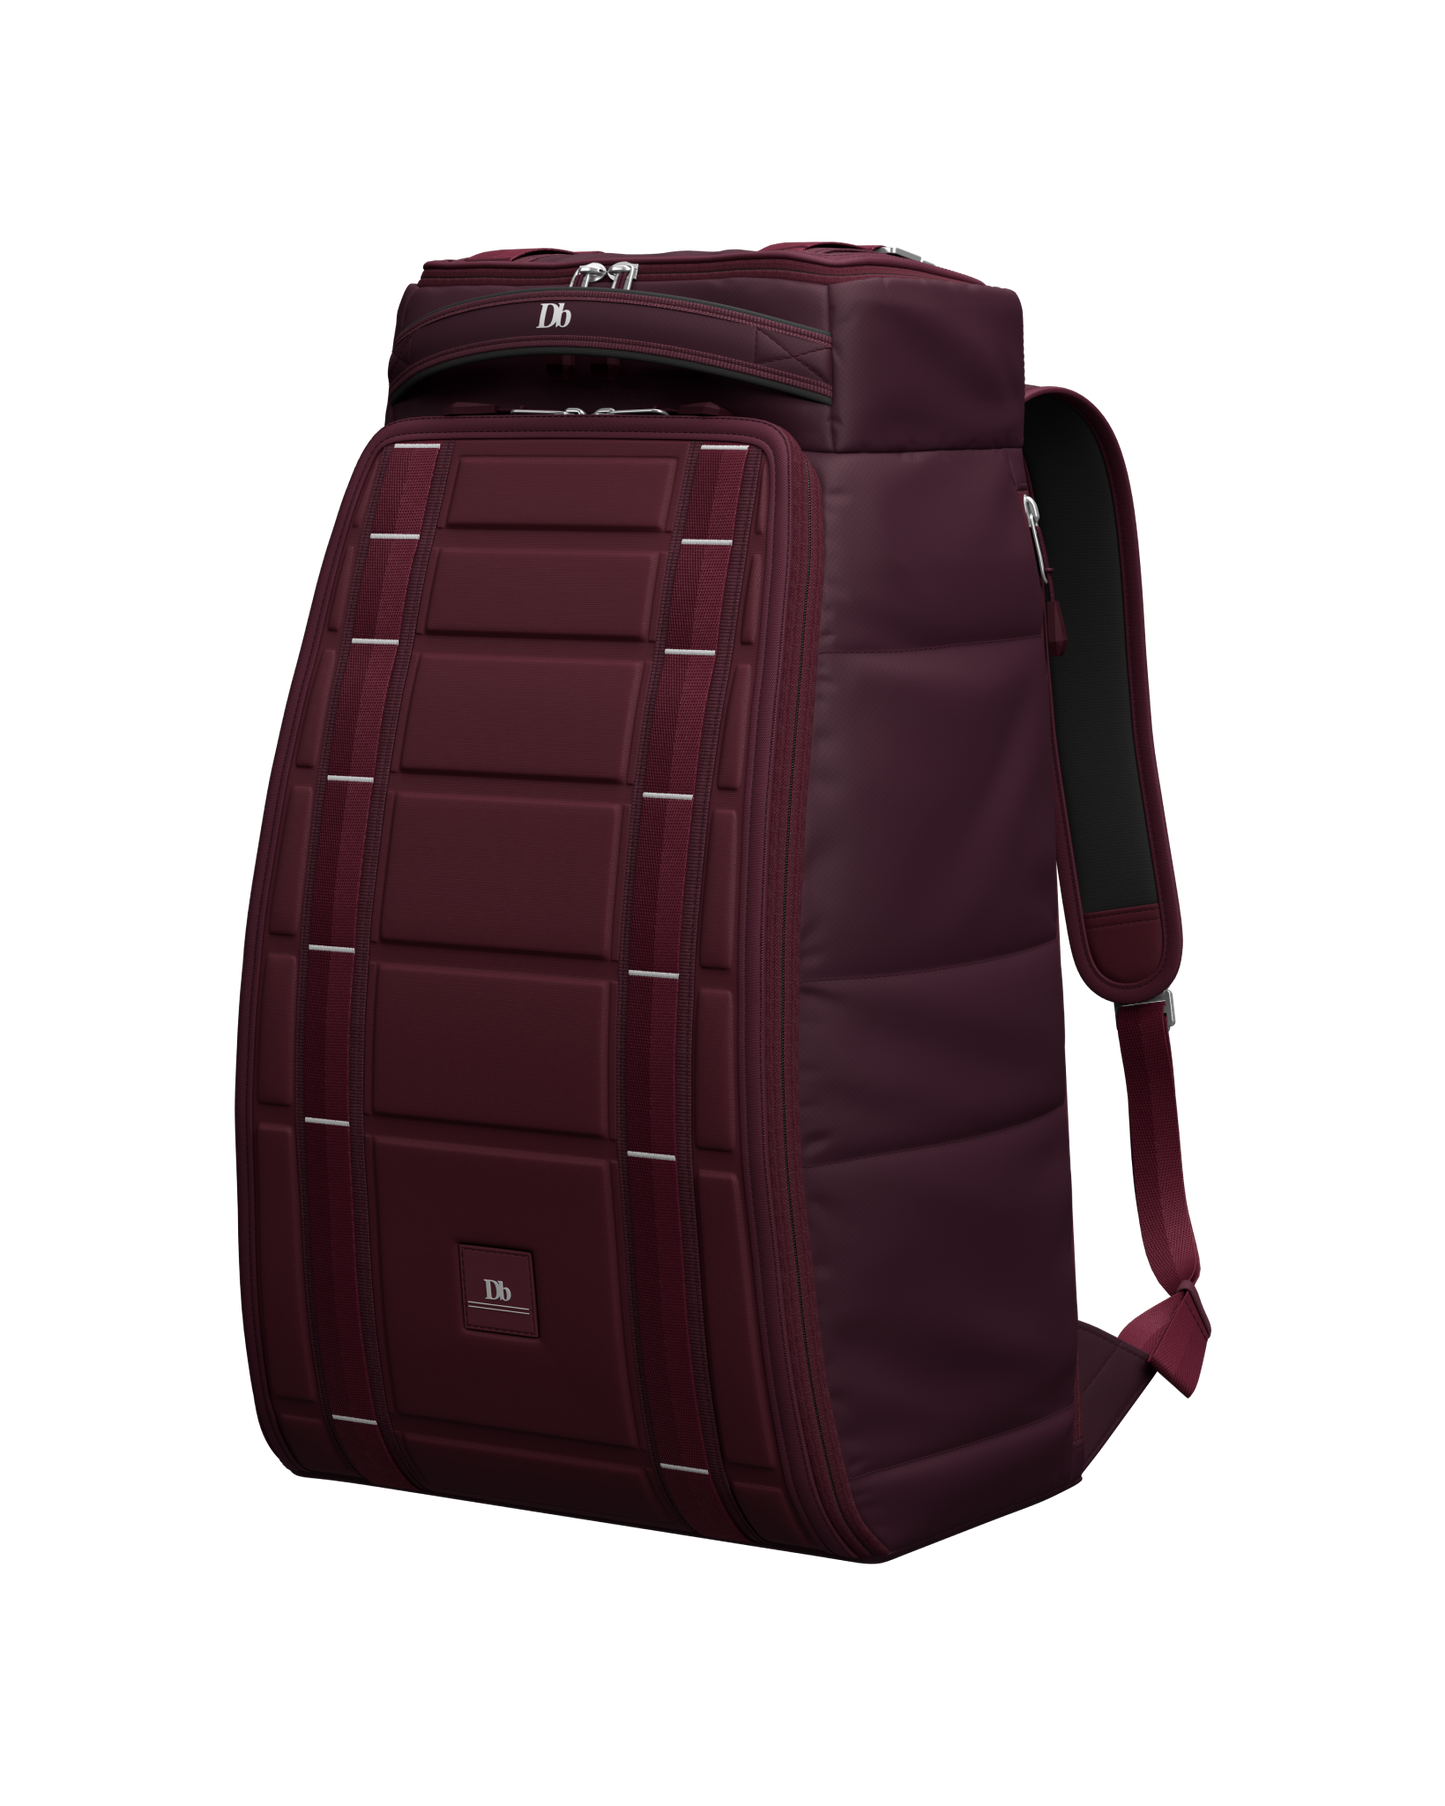 The Strom 30L Backpack